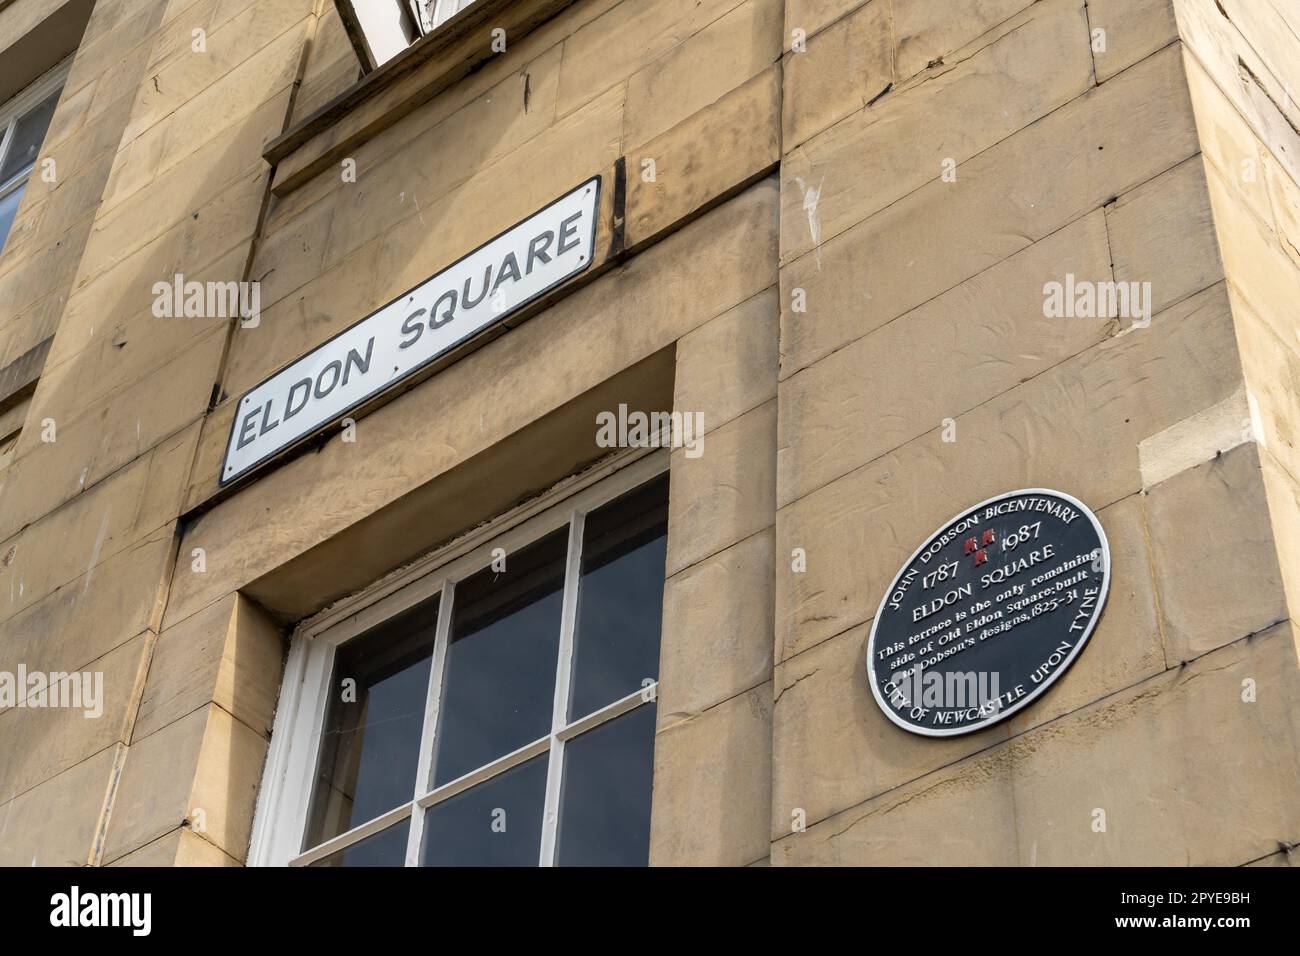 Street sign and heritage plaque at Old Eldon Square in the city of Newcastle upon Tyne, UK Stock Photo